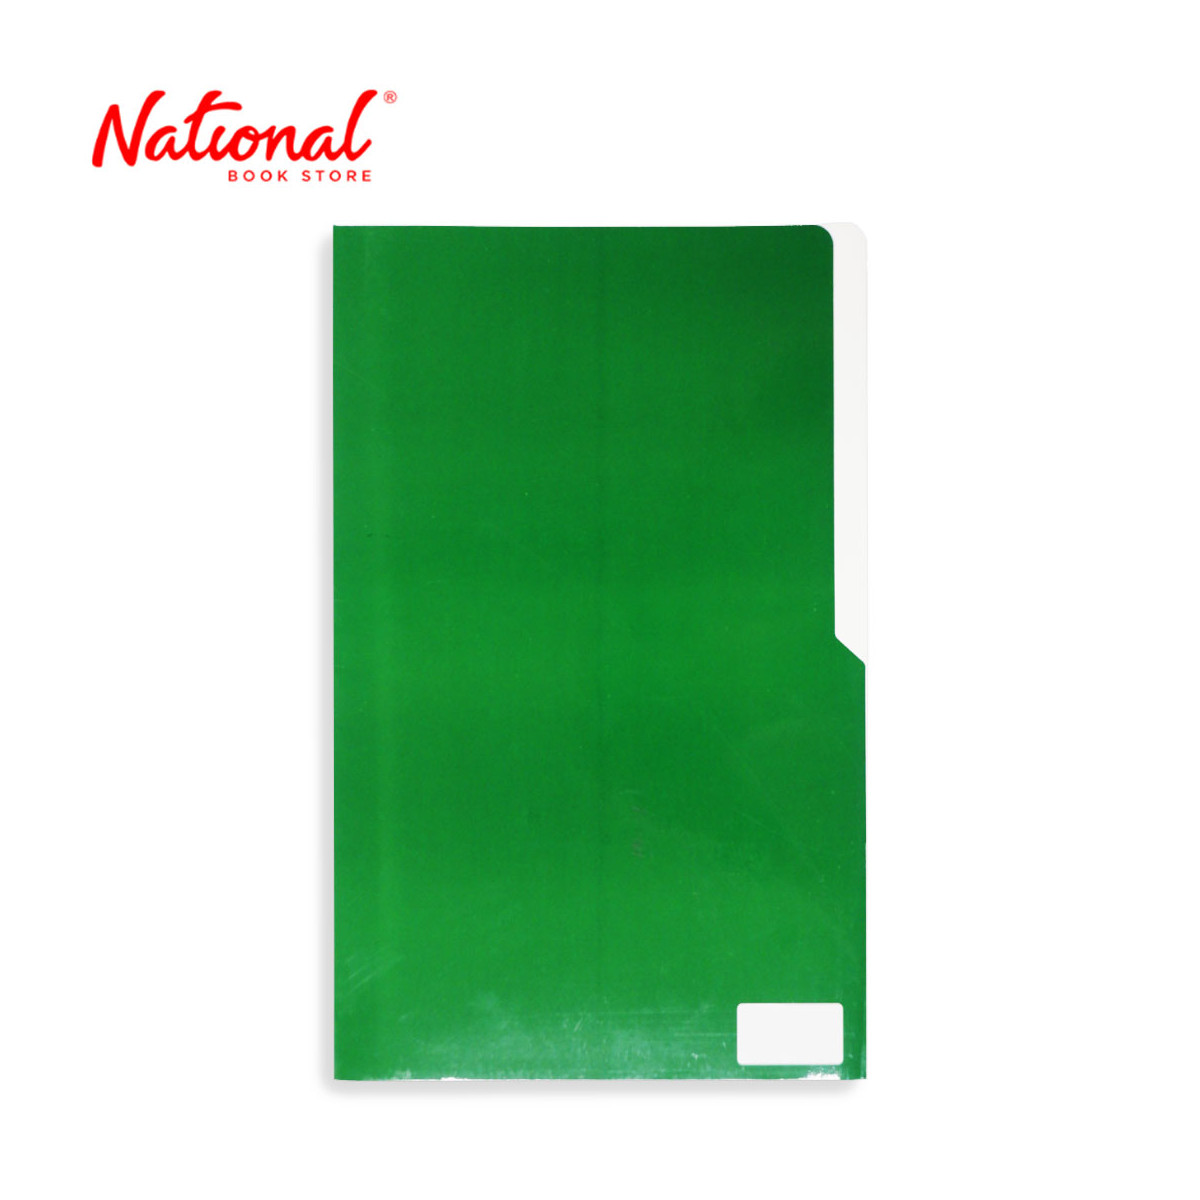 Tomodachi Folder Colored TPF Long with Inside Pockets Both Sides, Green Hornet - School Supplies